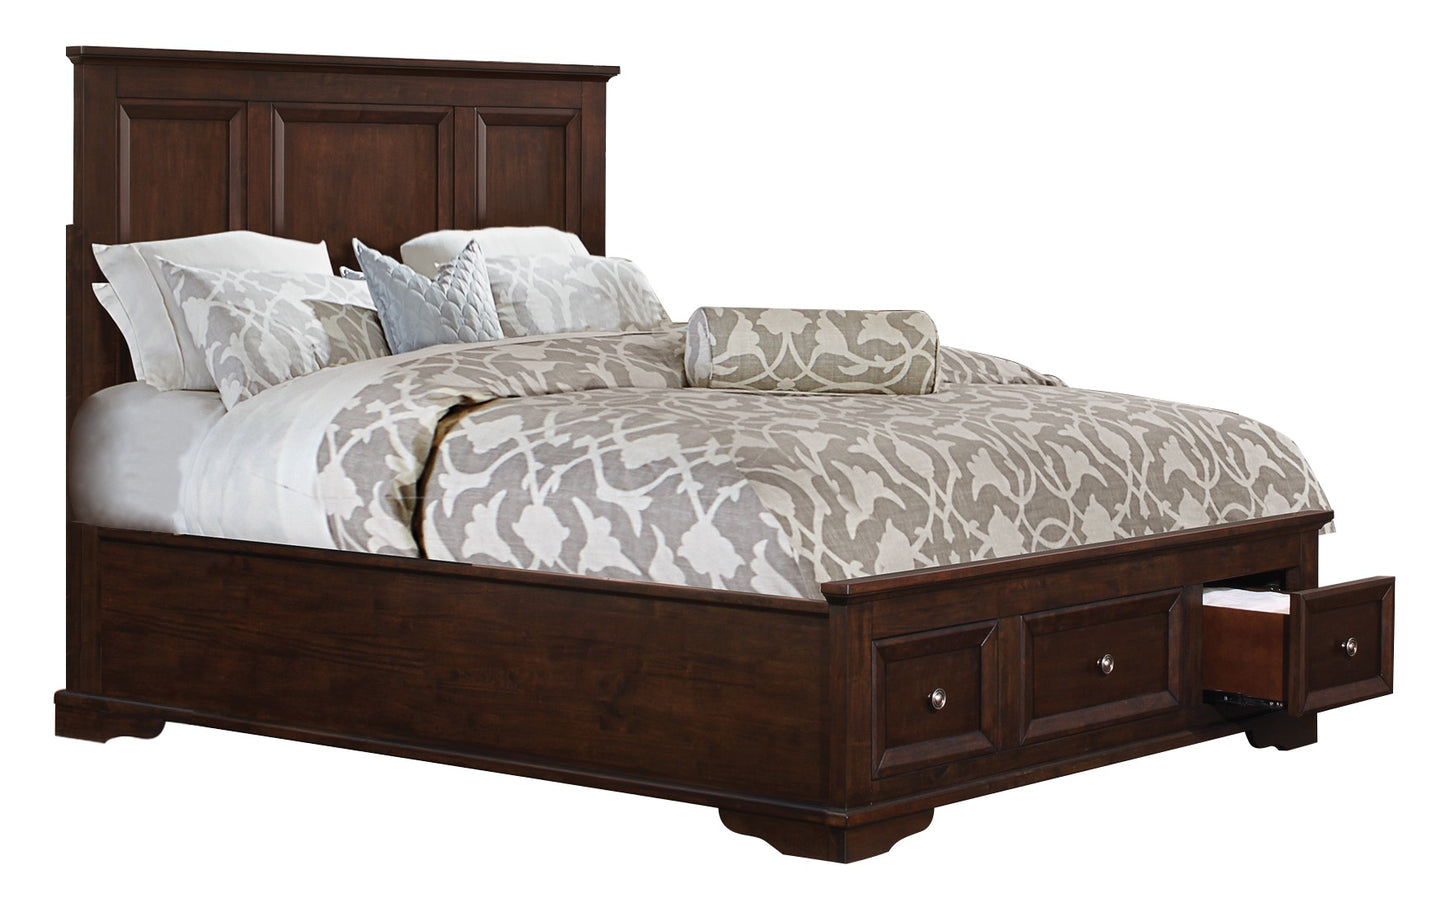 Elista Rustic Country E King Platform Bed with Footboard Storage in Espresso